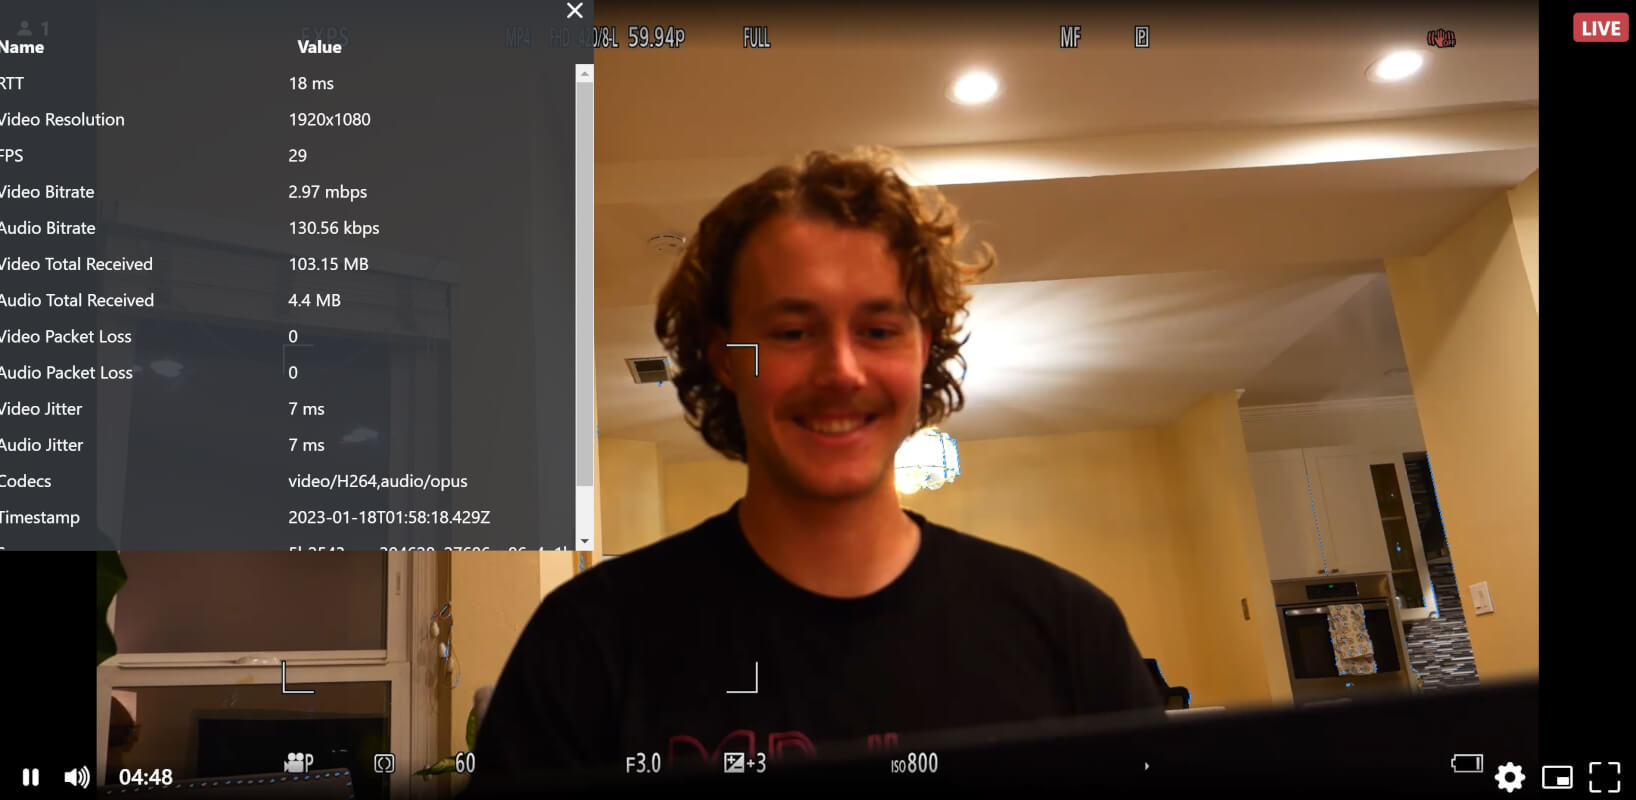 Image of the author via the camera, connected to the encoder which is streaming WebRTC to an online viewer. The image highlights the trip statistics including a round trip time of 18 ms for a 1080p stream.